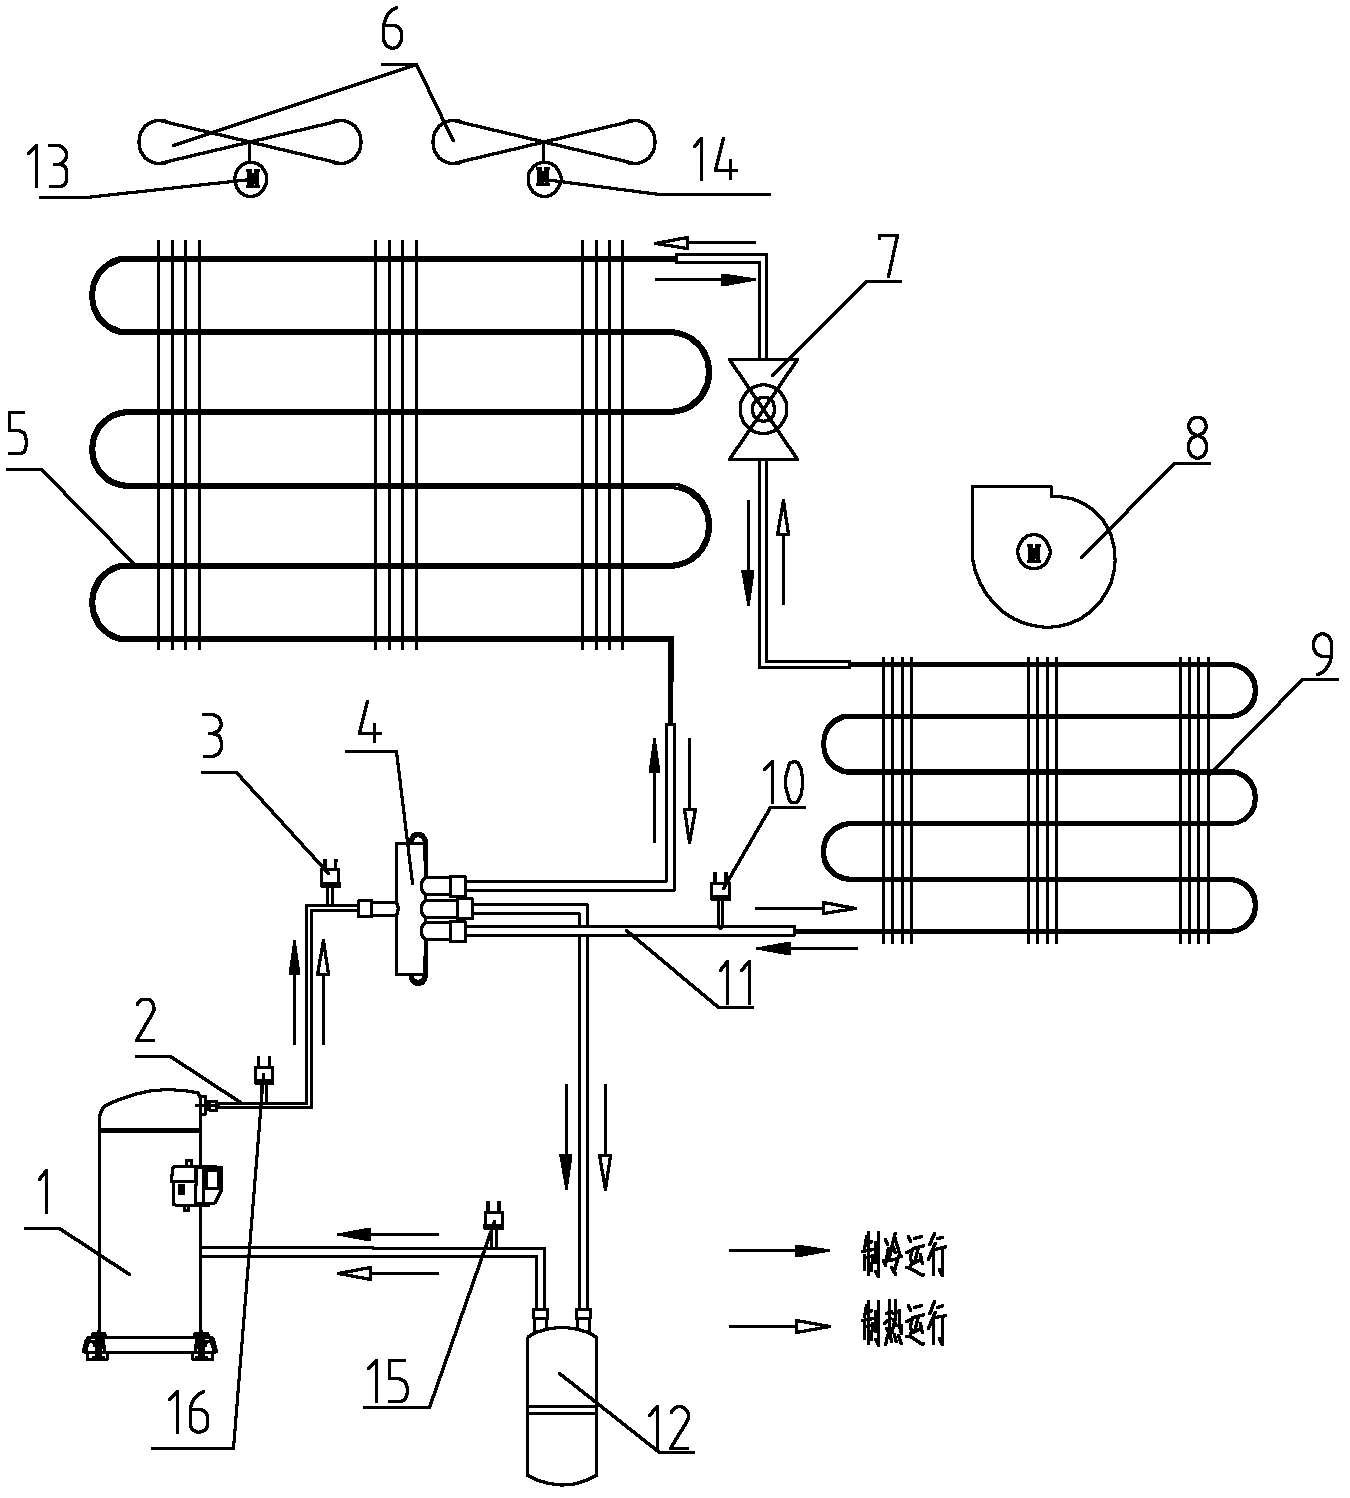 Control method of low temperature refrigeration of rooftop air conditioning unit